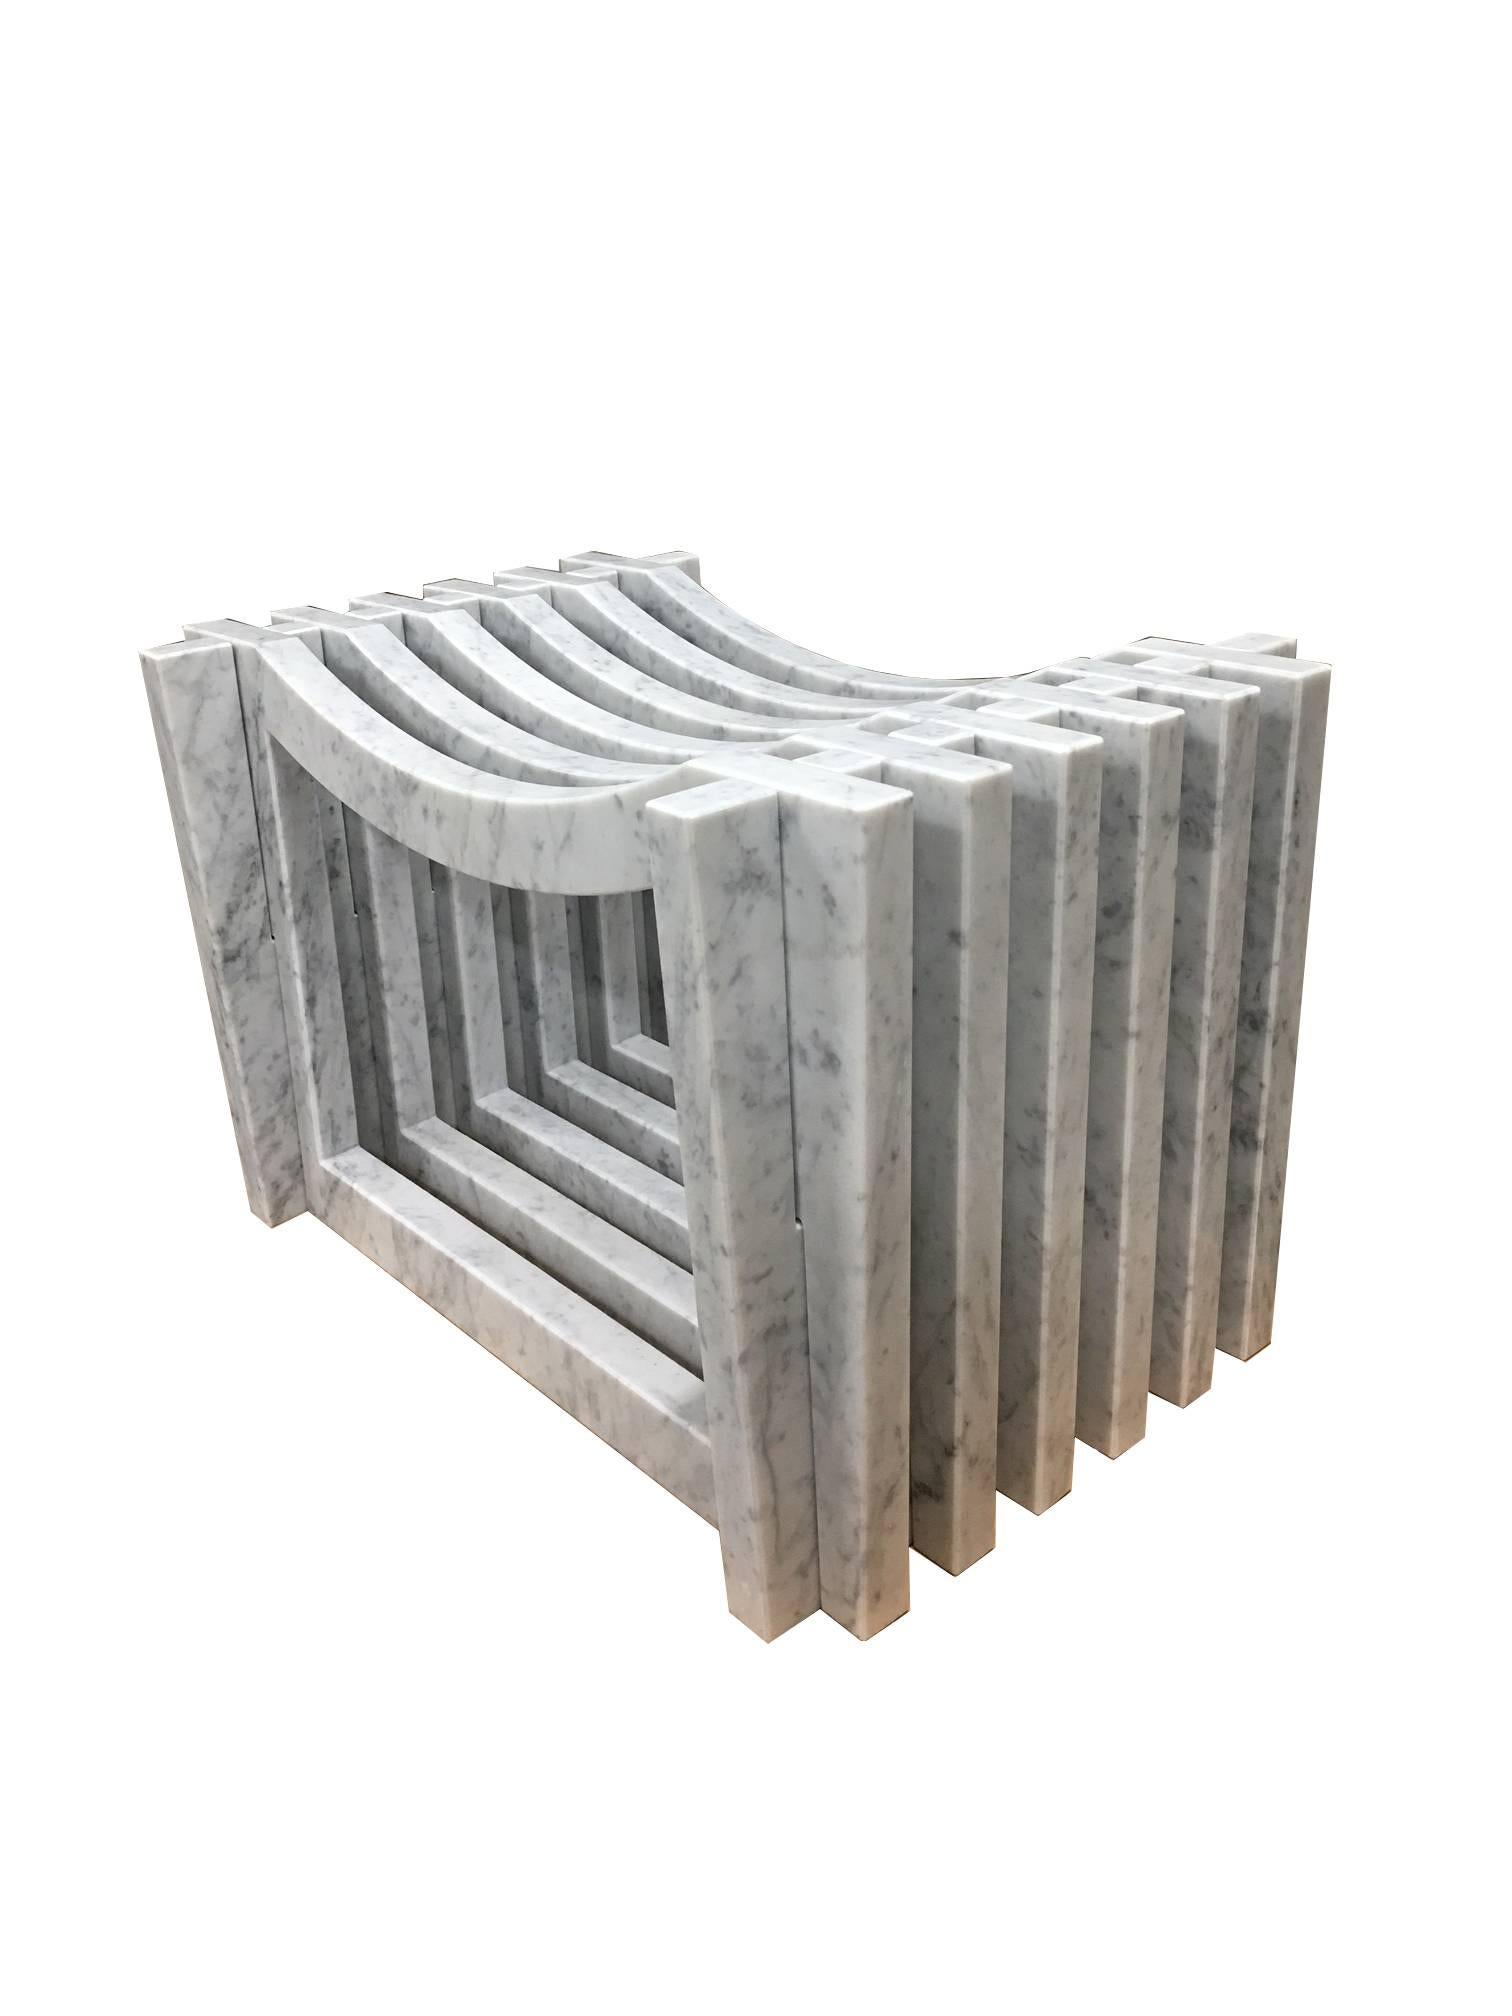 Hand-Crafted Italian Minimalist White Carrara Marble Benches or Stools by Massimo Mangiardi For Sale